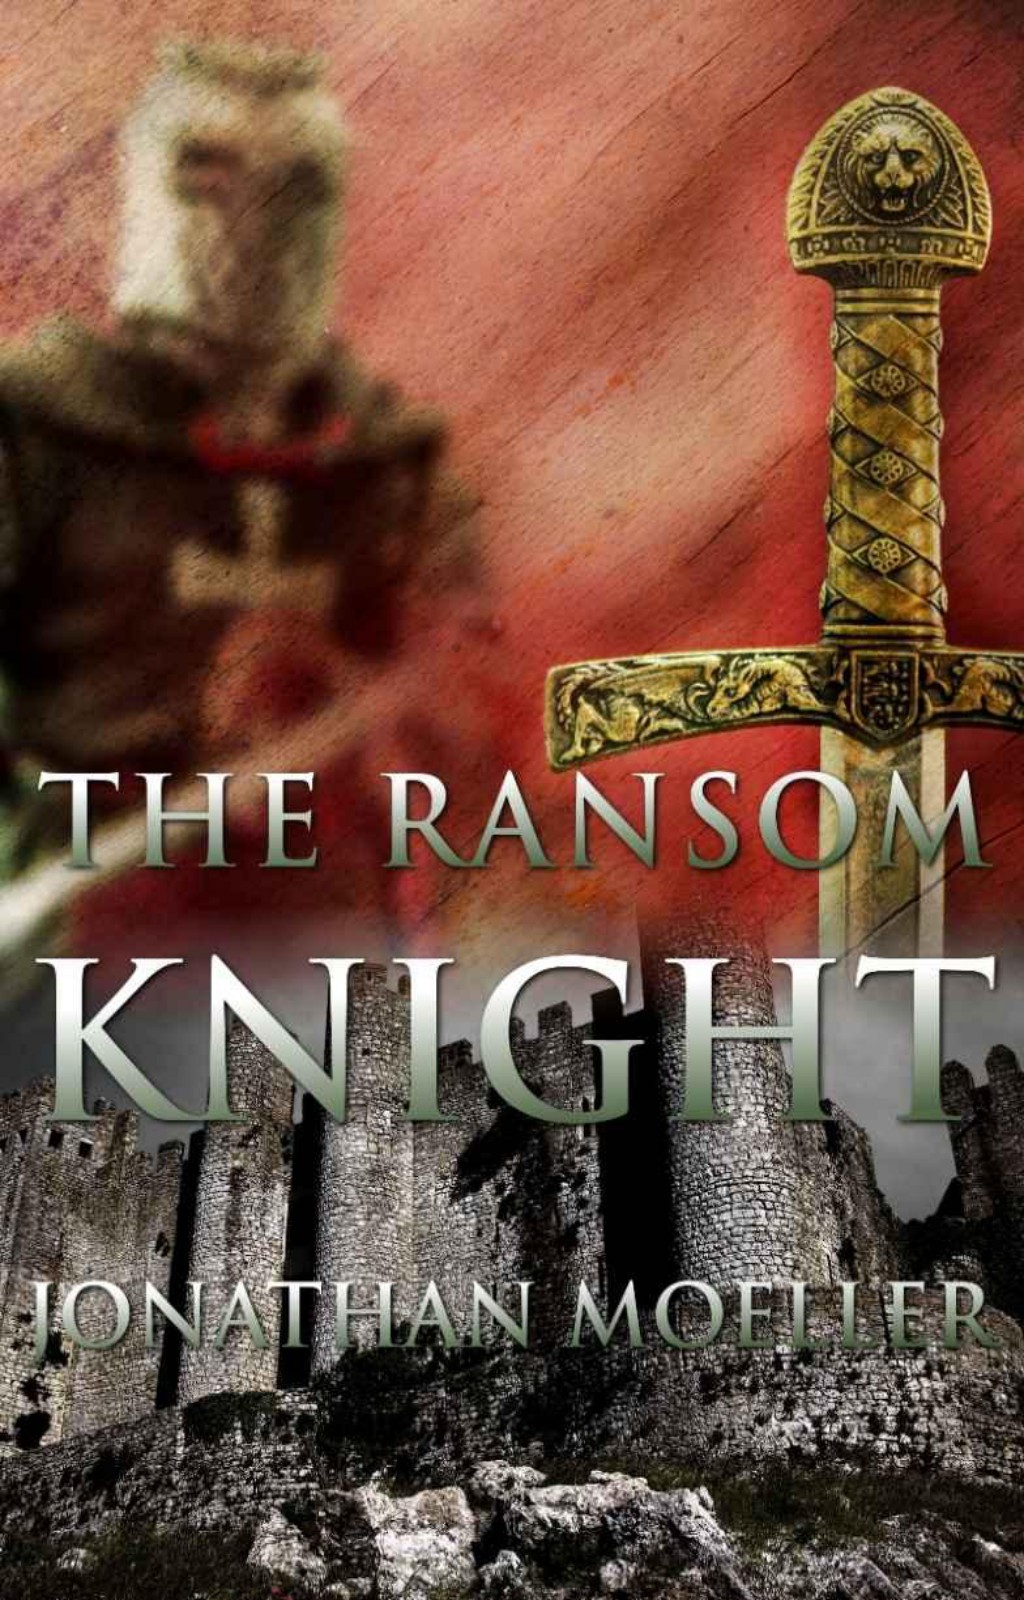 The Ransom Knight by Jonathan Moeller